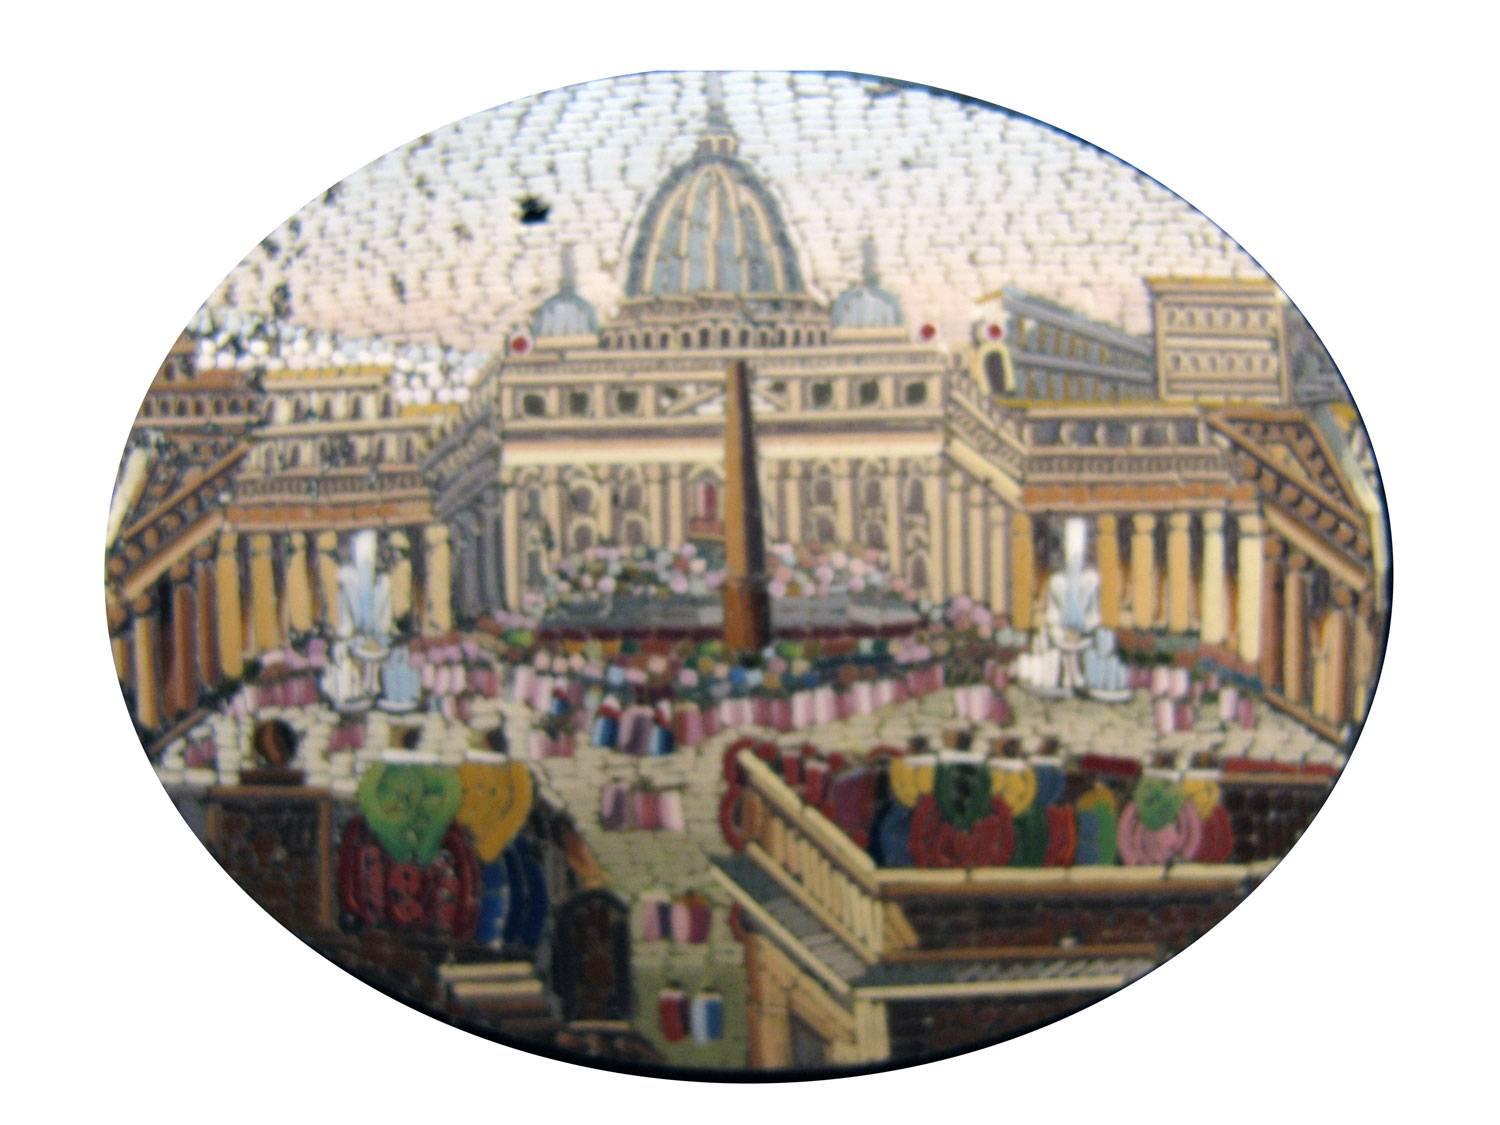 This is a Grand Tour brooch, a late 19th century era souvenir from Italy.
Tourists in Rome visited the plaza of St. Peter’s Square (Piazza San Pietro) in front of St. Peter’s Basilica in Vatican City, which is depicted with Bernini’s stunning